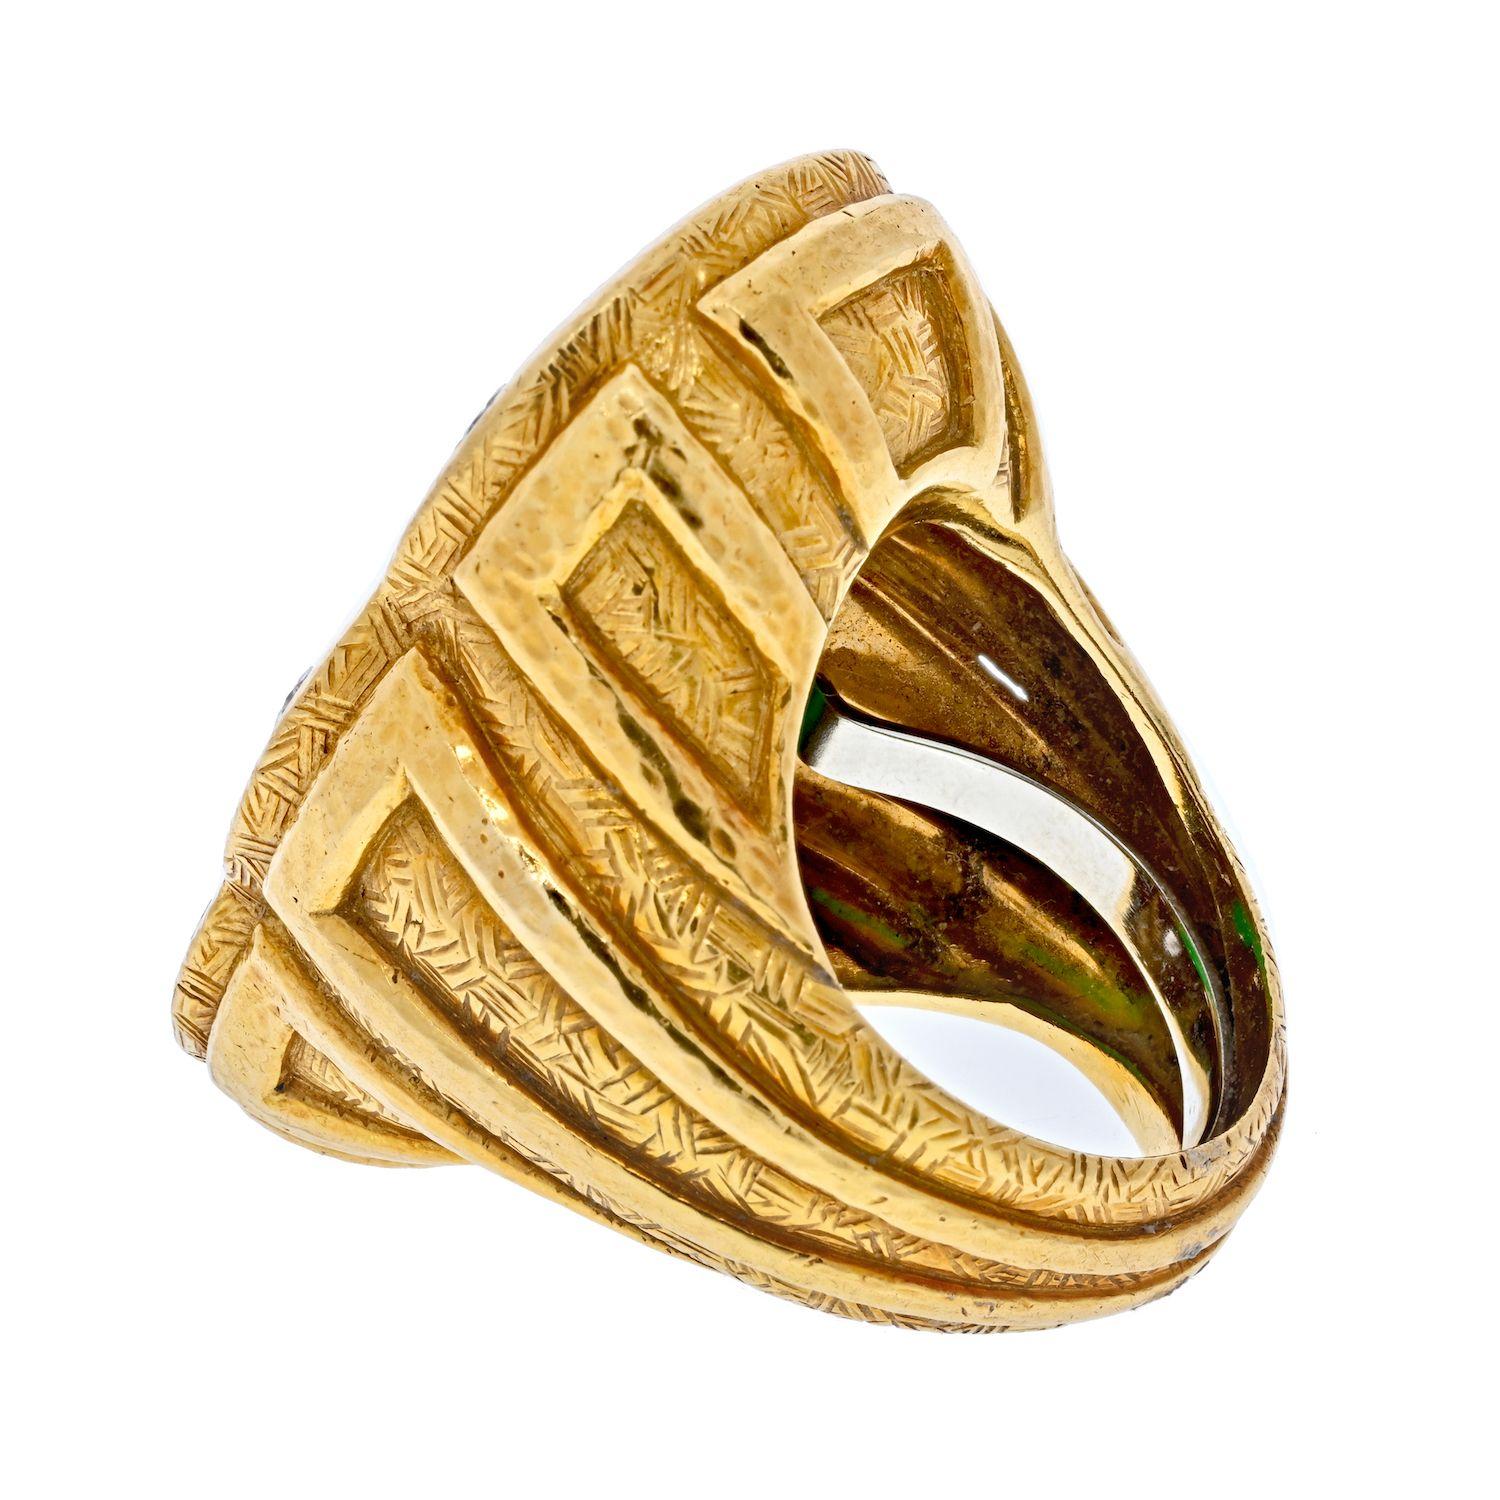 Large statement ring perfect for cocktails and fashion outings. Made by American designer David Webb, centering a carved green jade plaque featuring a stylized dragon, the hammered gold mounting accented with round diamonds.
Diamonds approx.